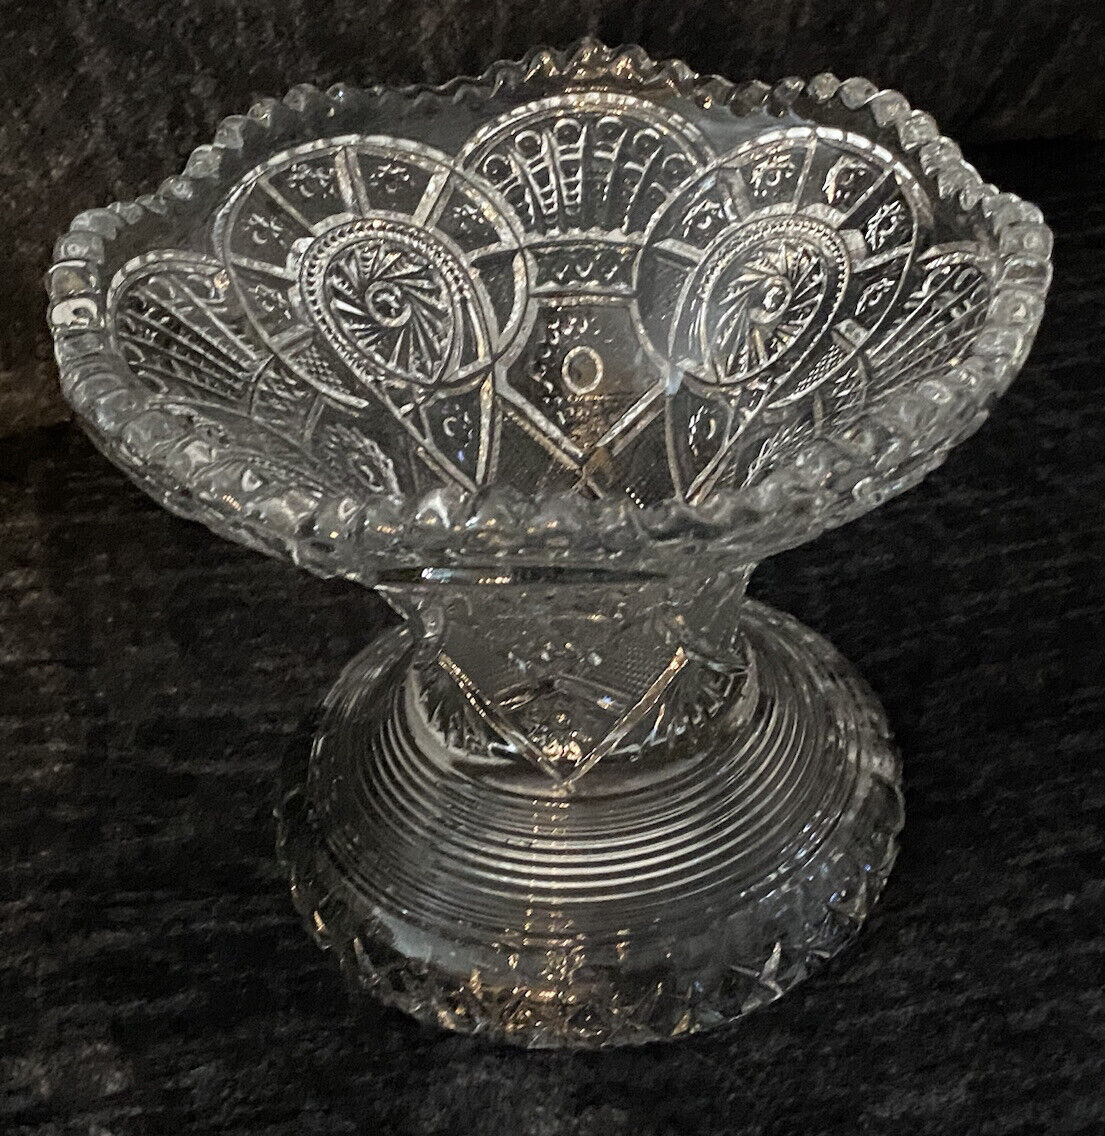 vintage Heavily cut Crystal glass candy dish or Fruit bowl Home Decor Pedestal